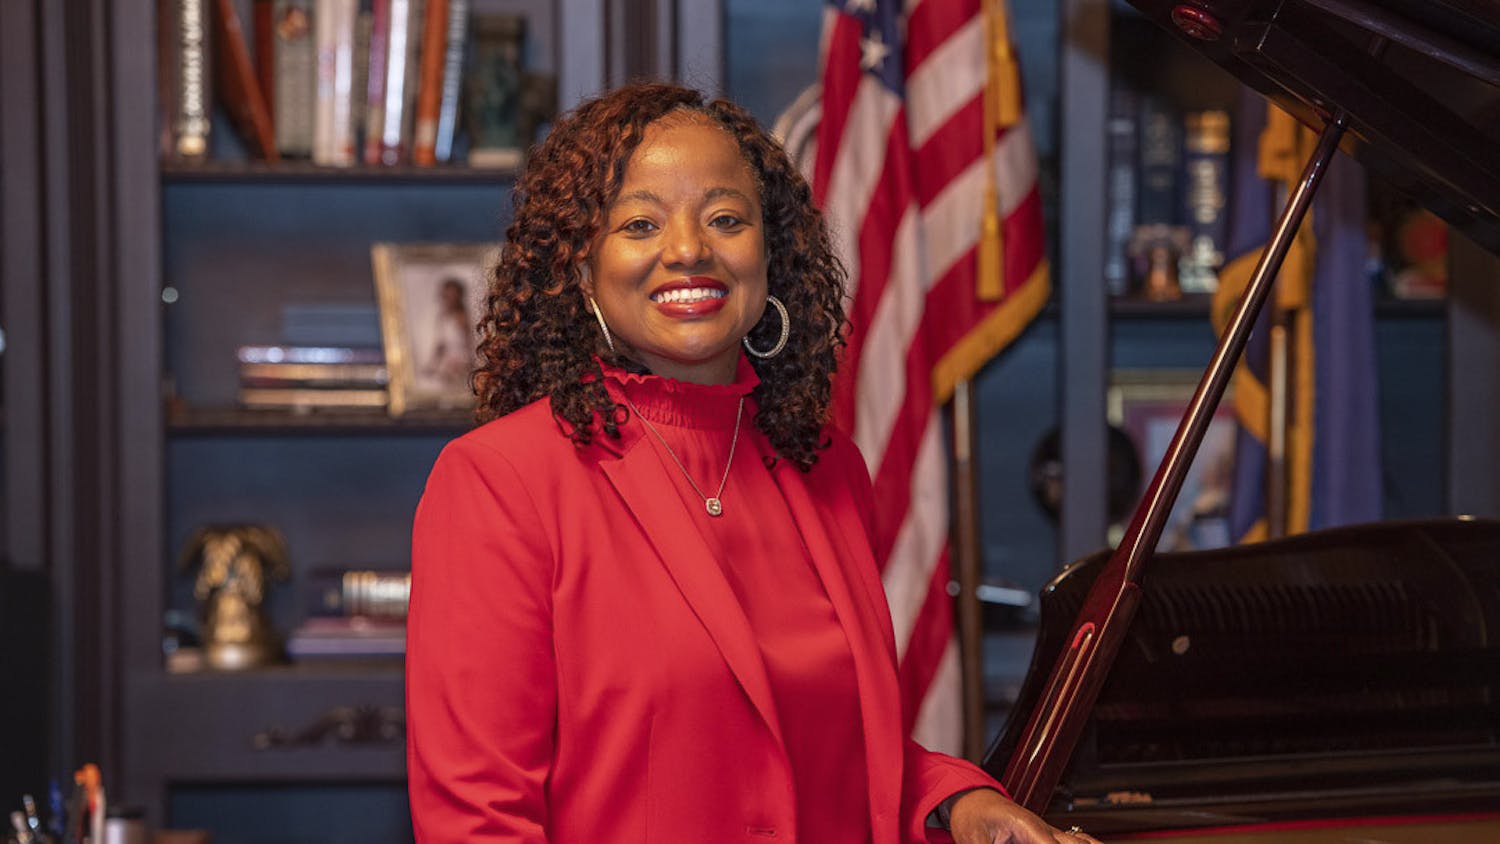 DeAndrea Gist Benjamin, a Judge of the United States Court of Appeals for the Fourth Circuit poses for a portrait in her office. Judge Benjamin is the second Black female Alumni from South Carolina to earn a position on the U.S. Supreme Court of Appeals.
